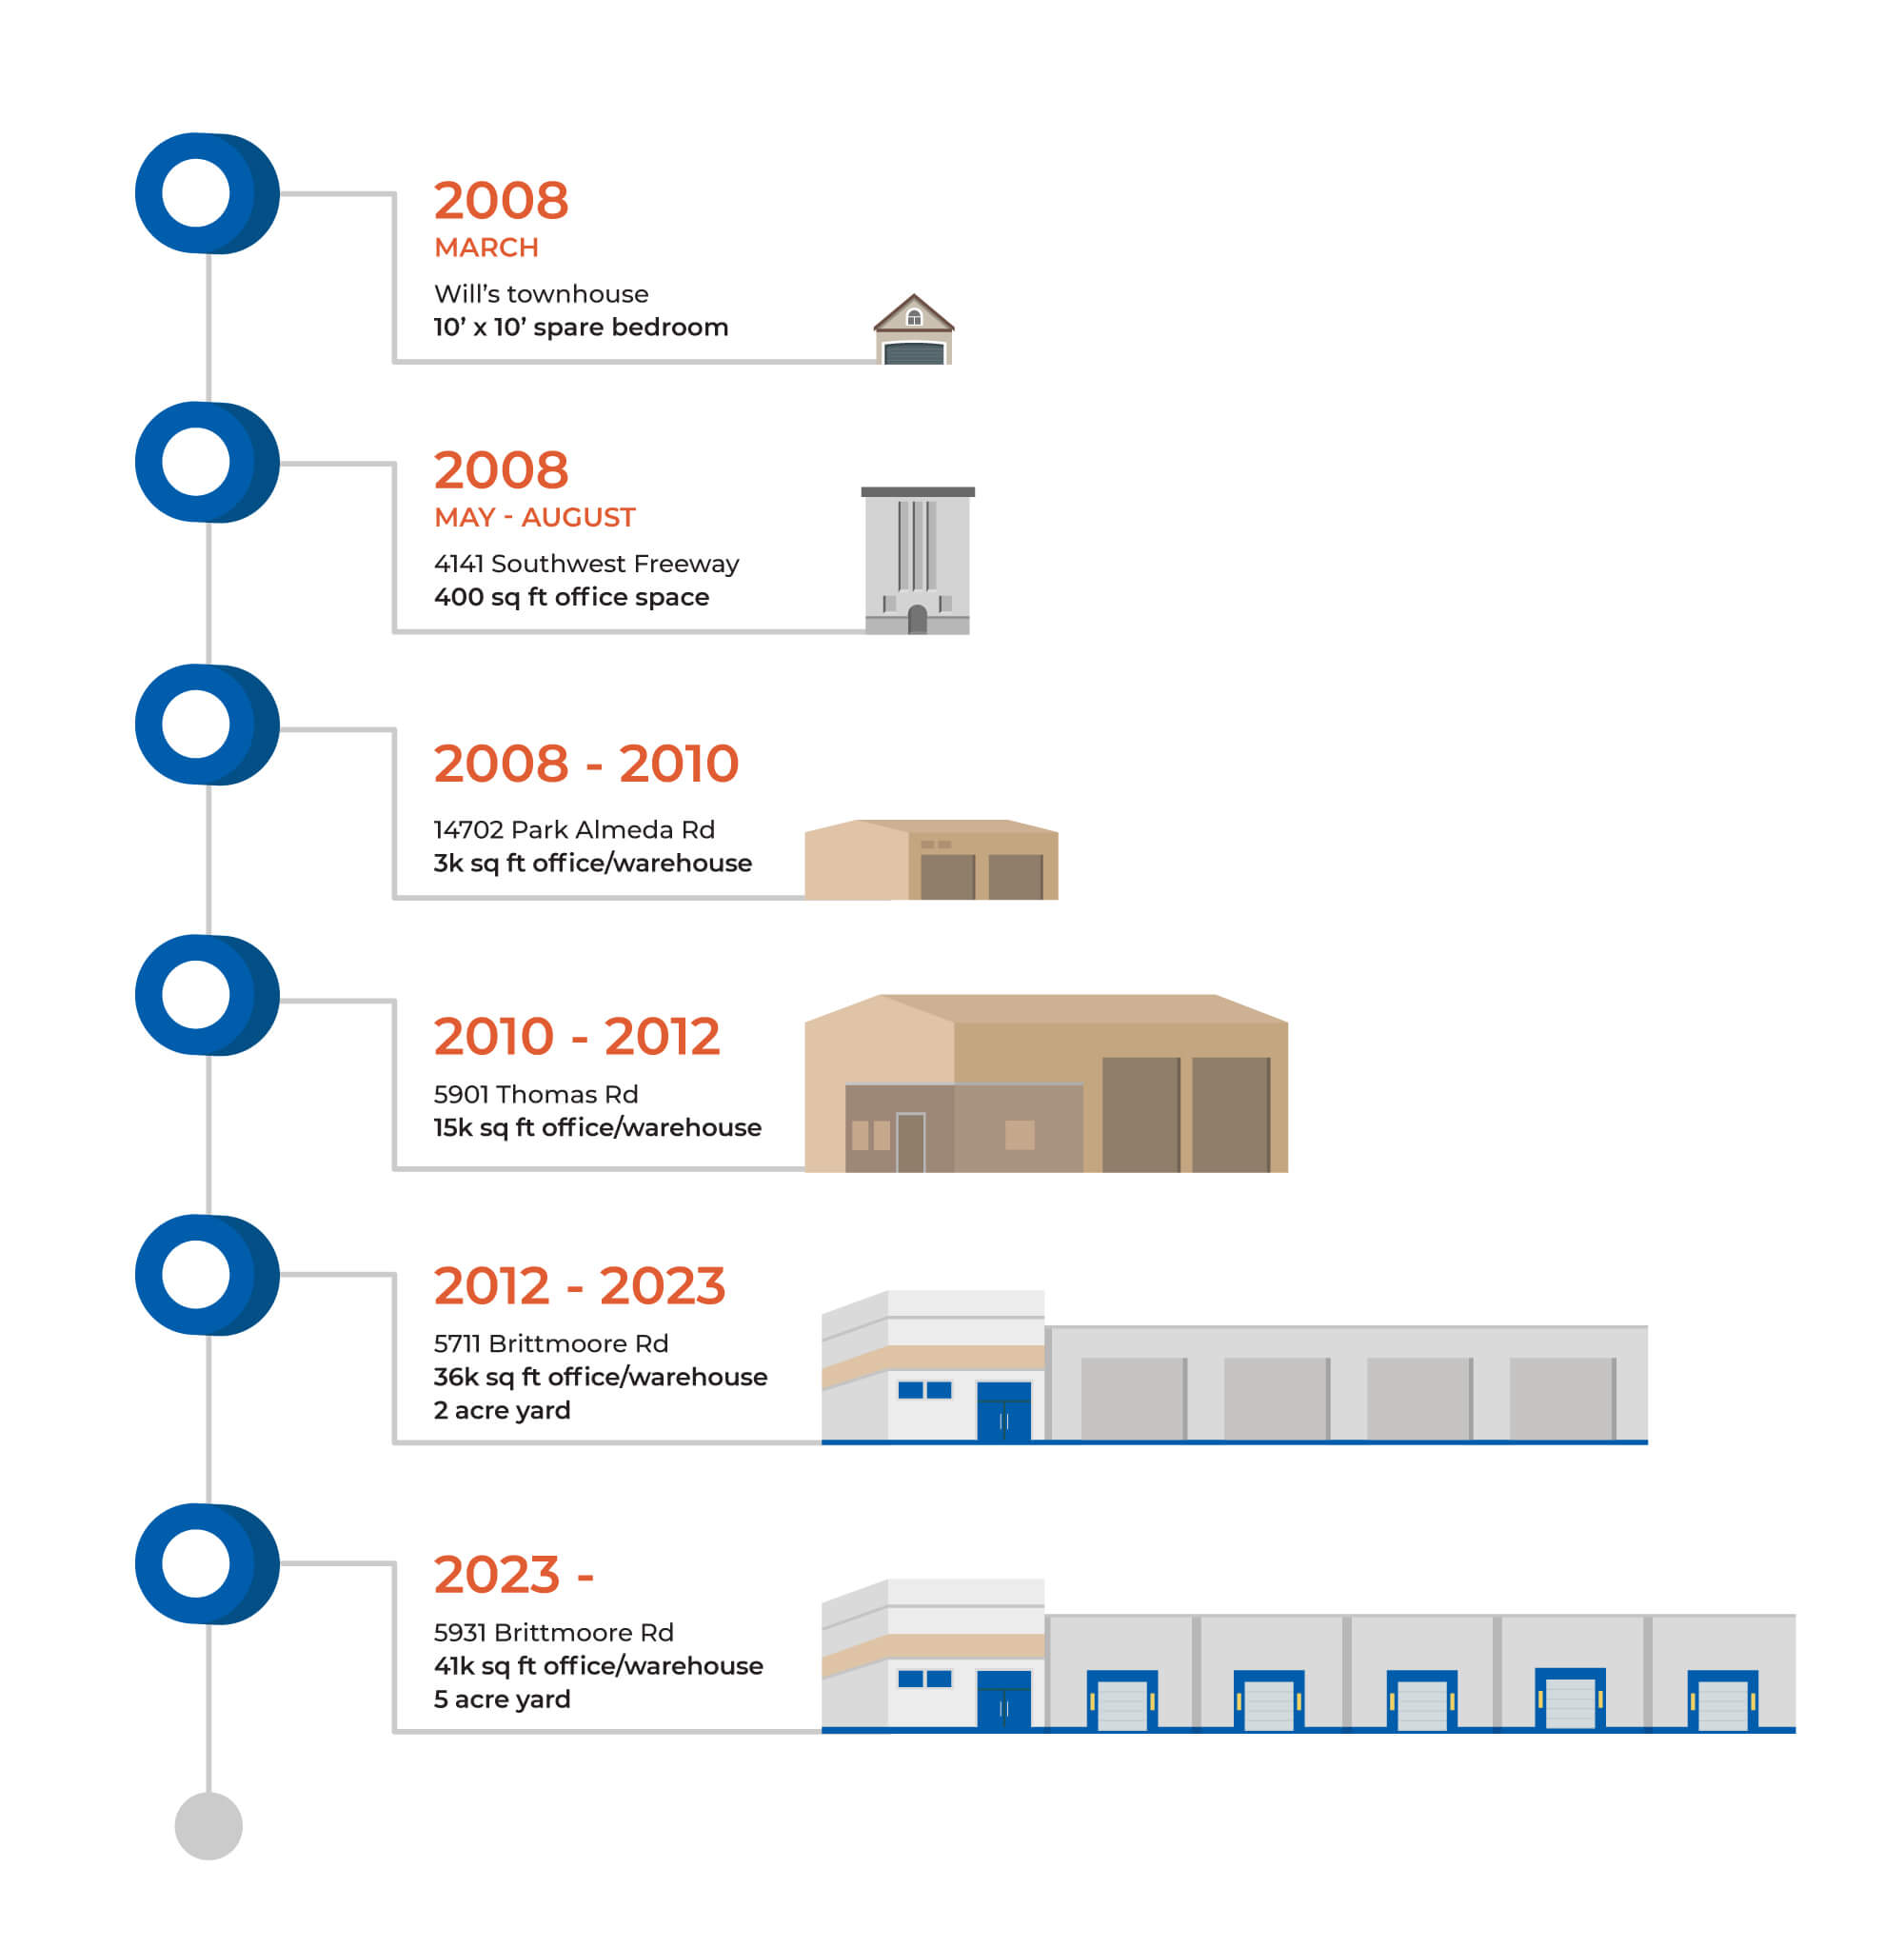 History of WPP's facilities, from a 10' x 10' townhouse to 41k sq ft office/warehouse space